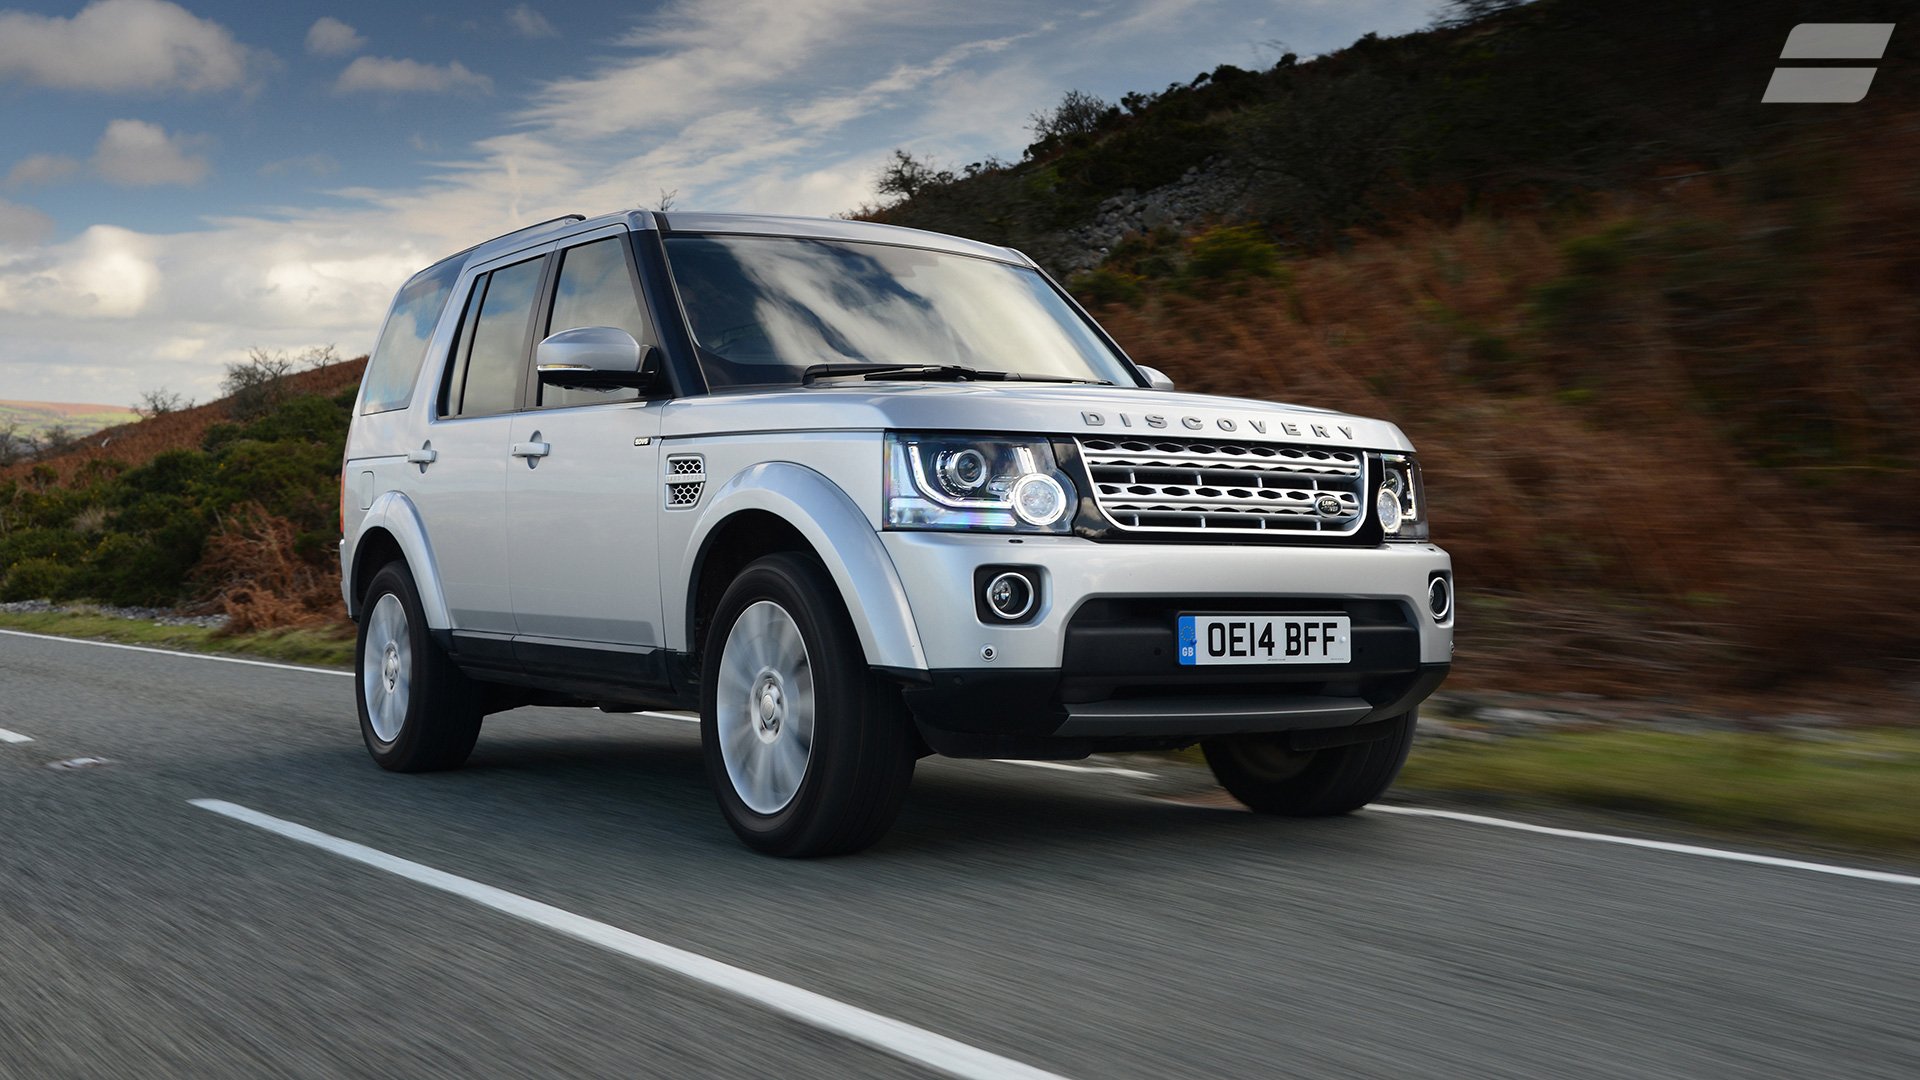 7 Seater Land Rover Discovery 4 cars for sale | AutoTrader UK